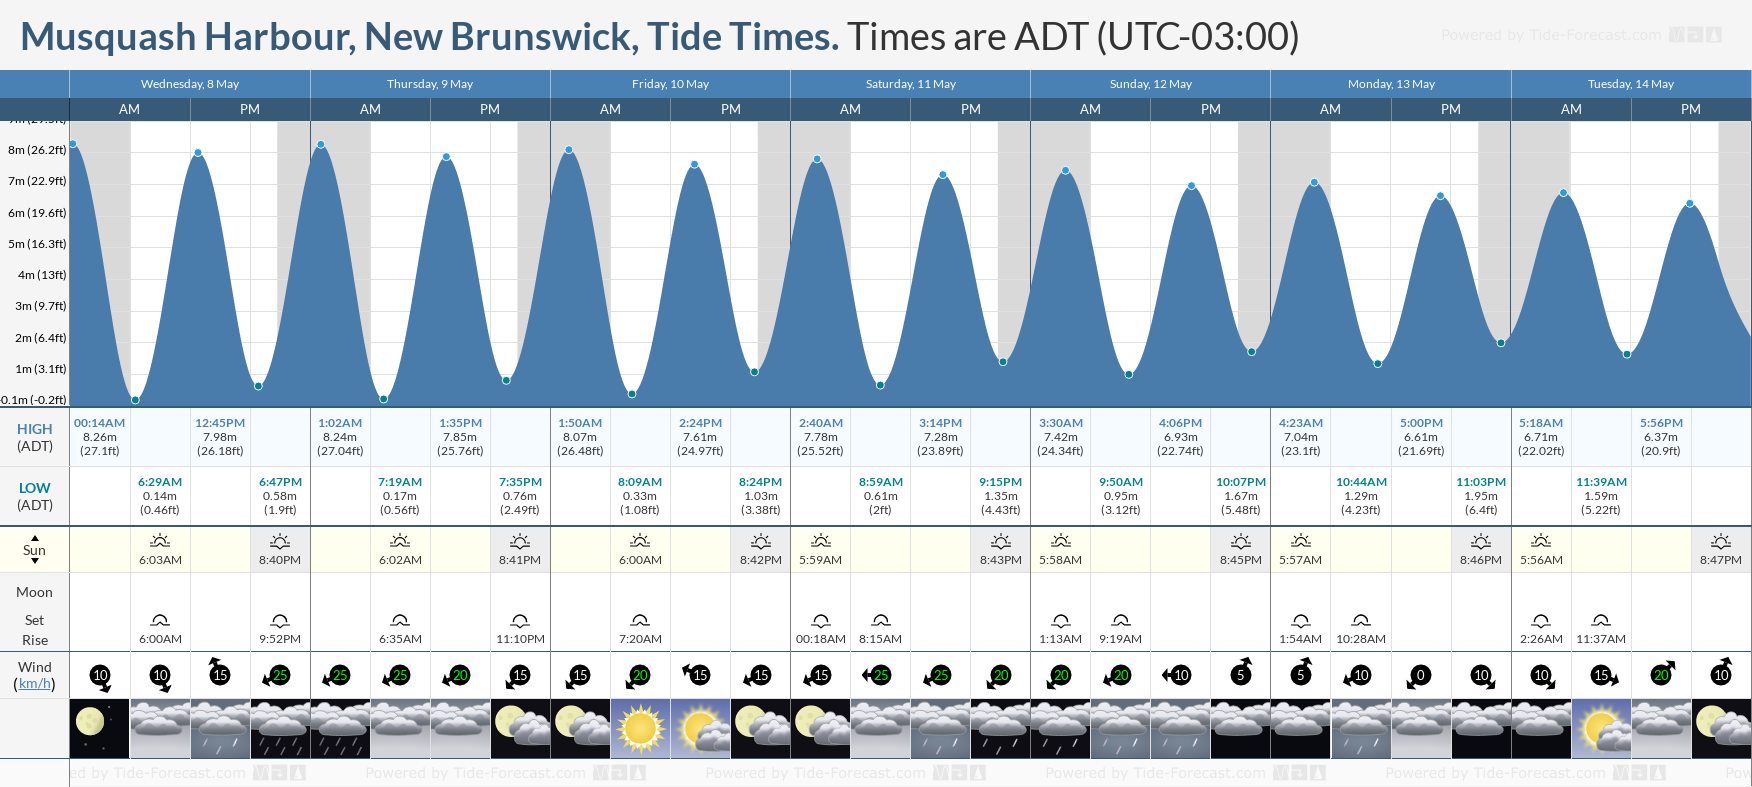 Musquash Harbour, New Brunswick Tide Chart including high and low tide tide times for the next 7 days